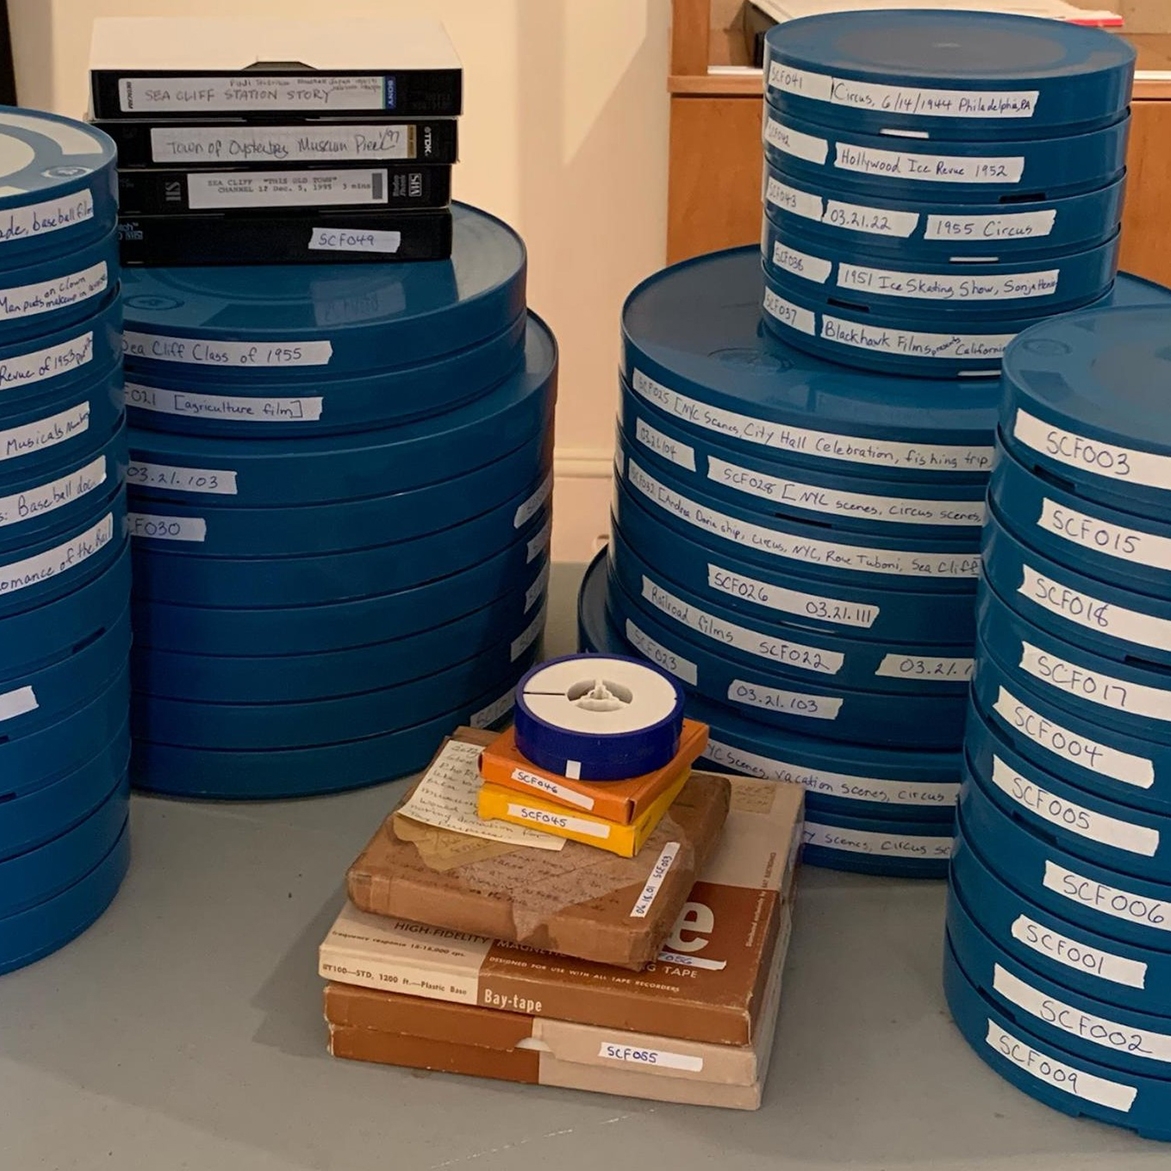 image of multiple large stacks of 35 mm film prints in blue film cannisters, with cardboard boxes in the middle. 